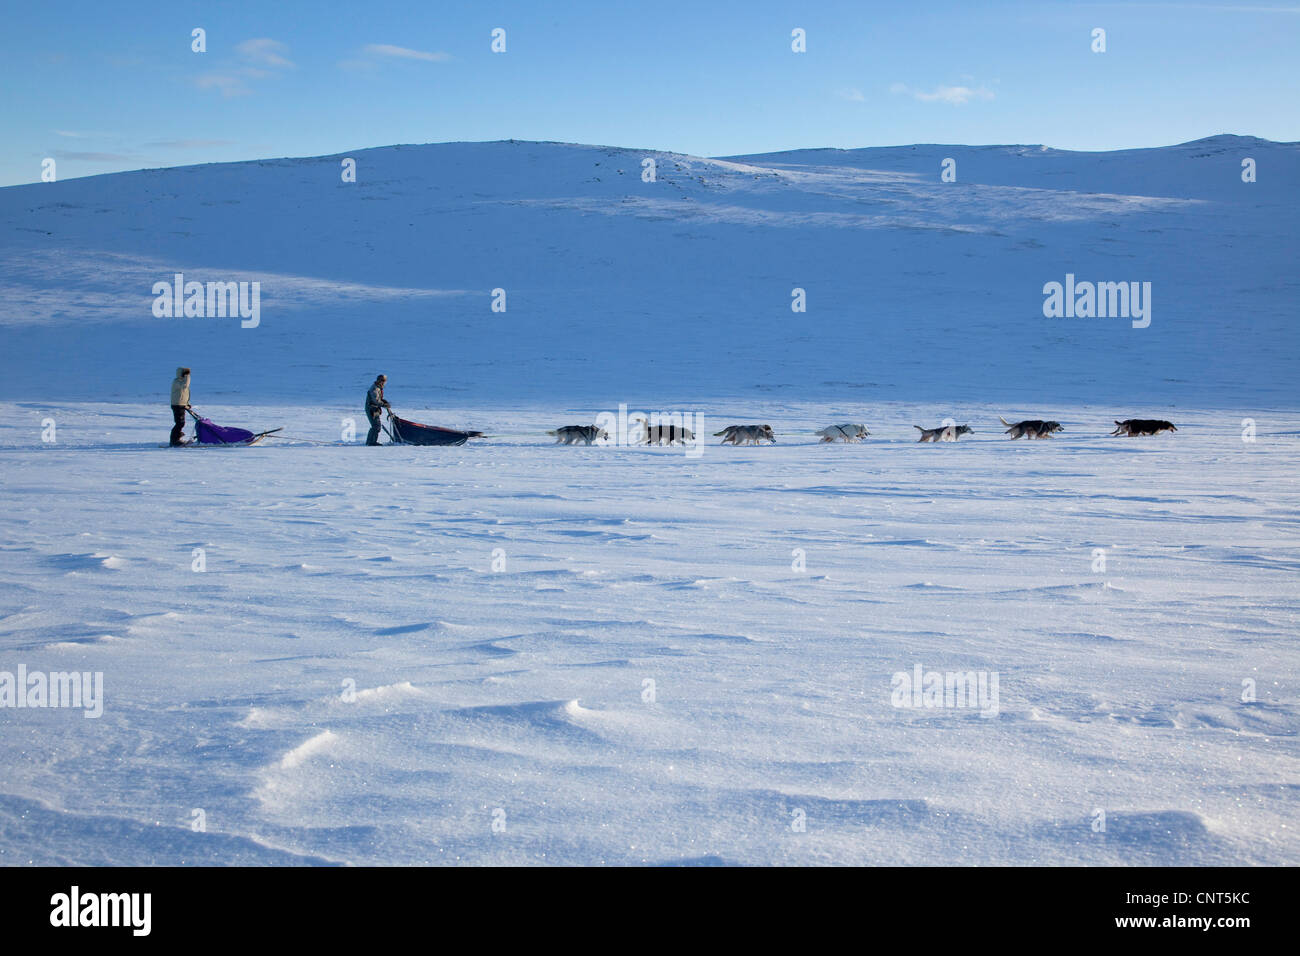 domestic dog (Canis lupus f. familiaris), dog sled with 14 dogs in snow landscape, Norway, Dovrefjell Sunndalsfjella National Park Stock Photo